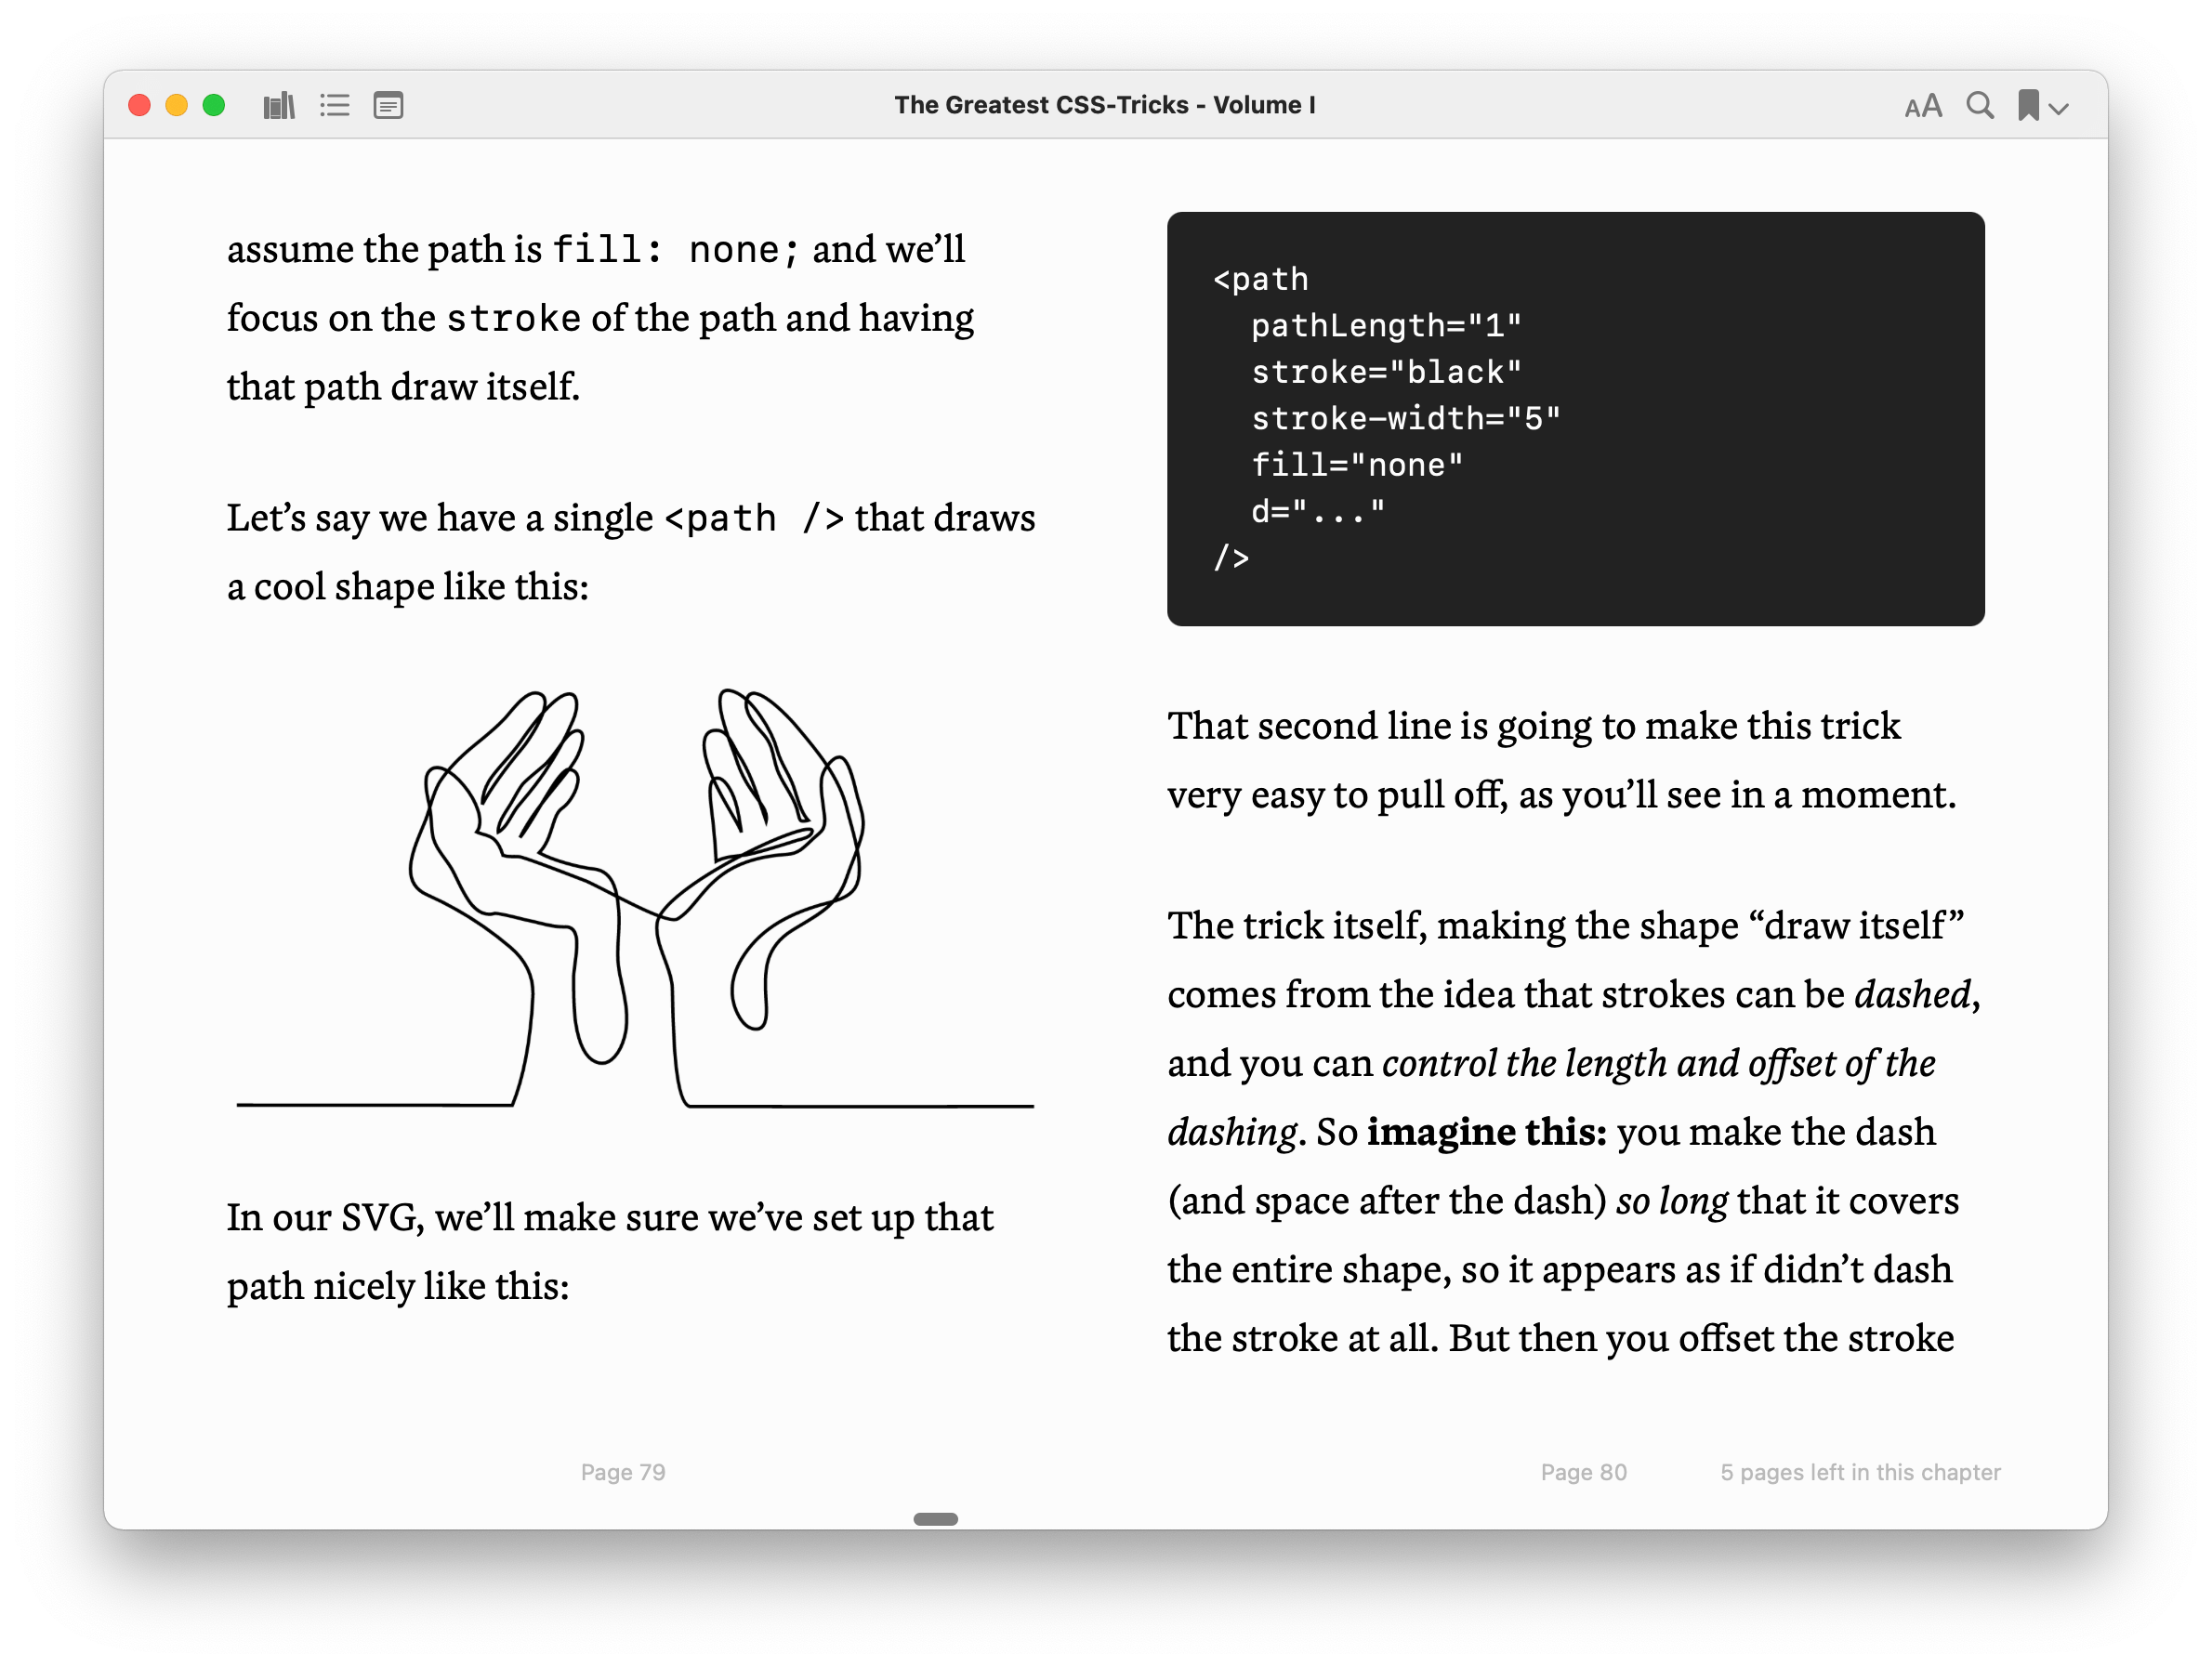 Mac app Books.app with the EPUB version of the book open.